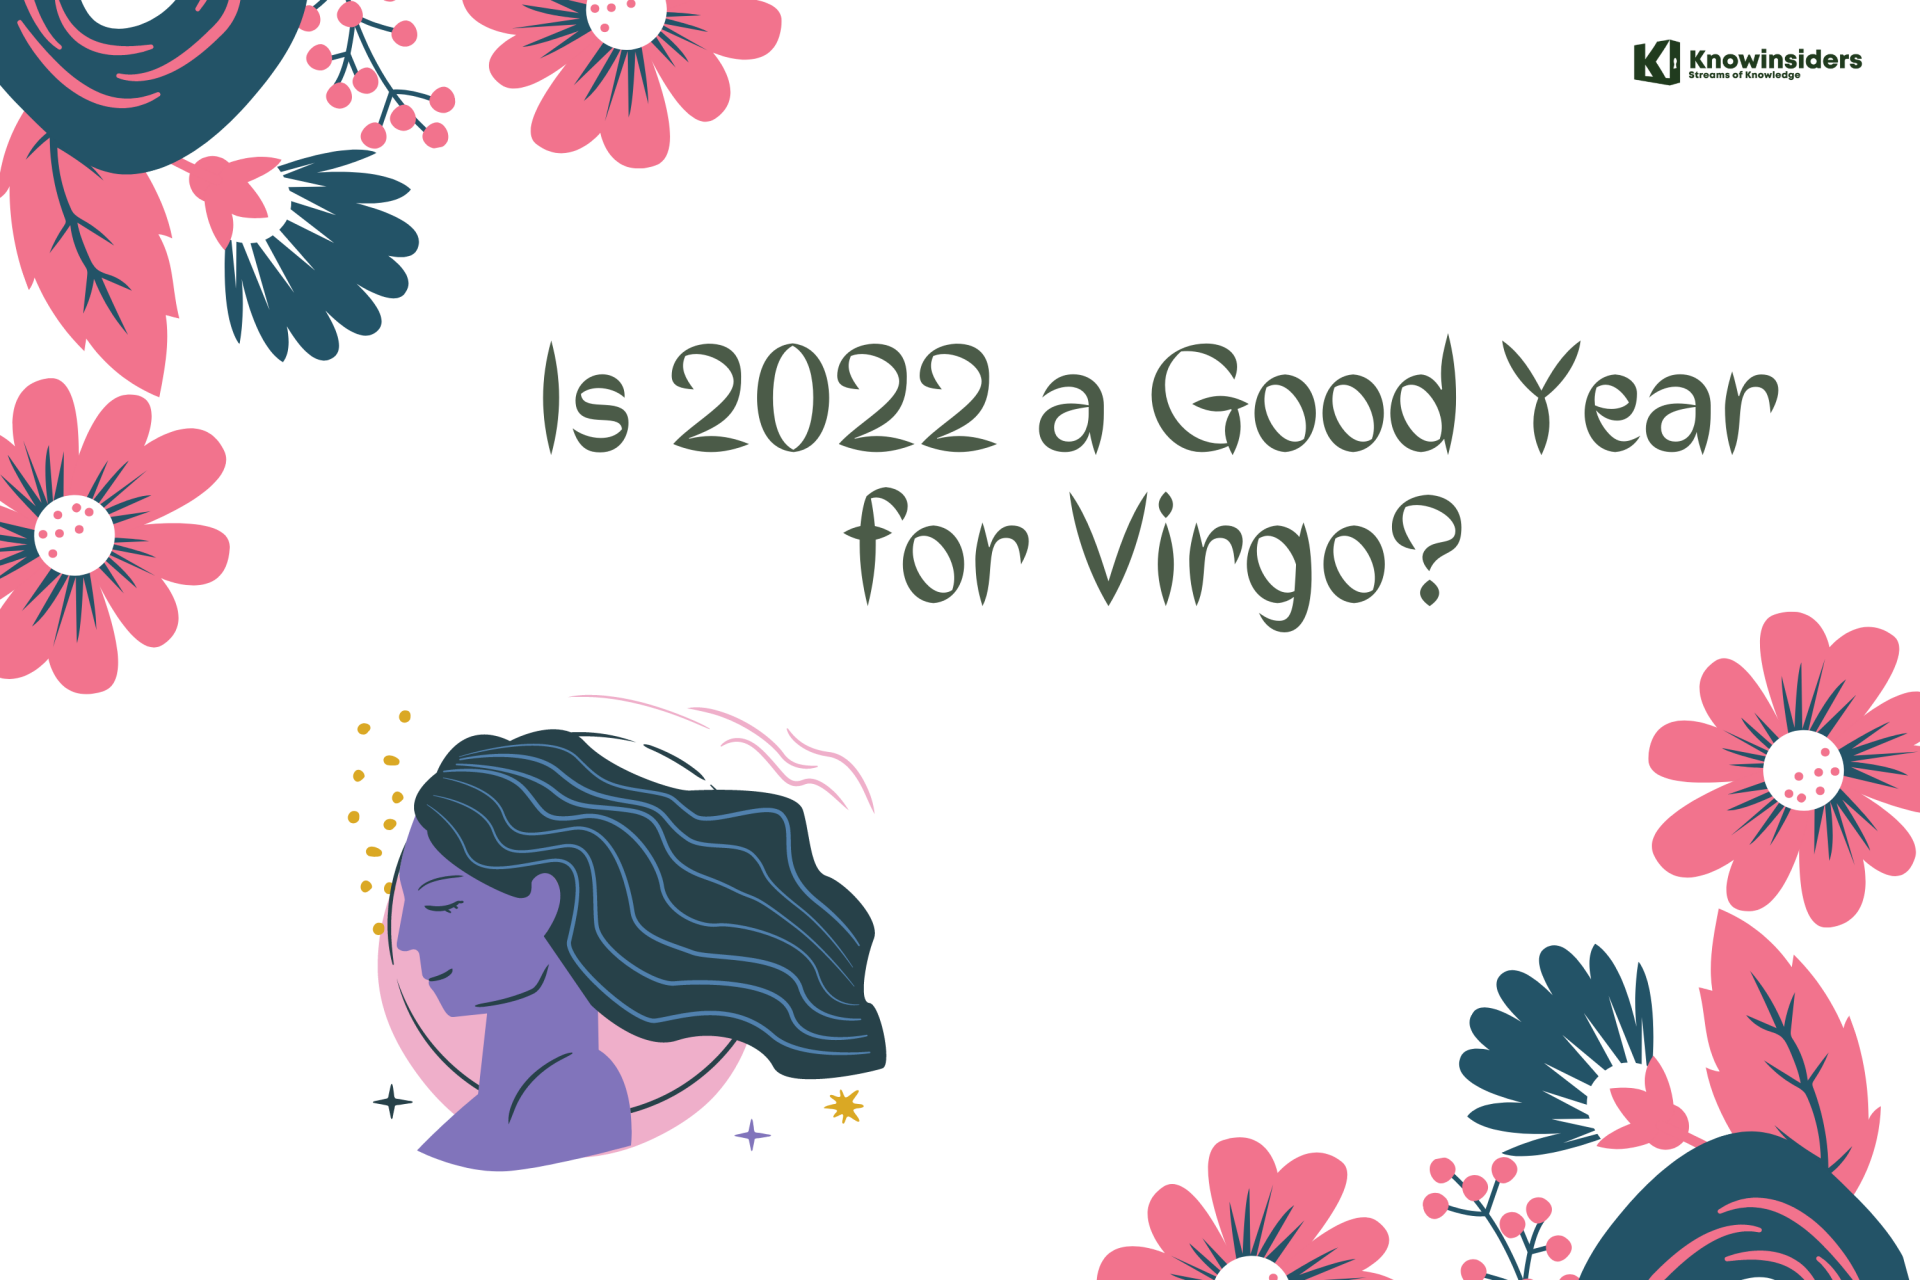 VIRGO March 2022 Horoscope: Monthly Prediction for Love, Career, Money and Health